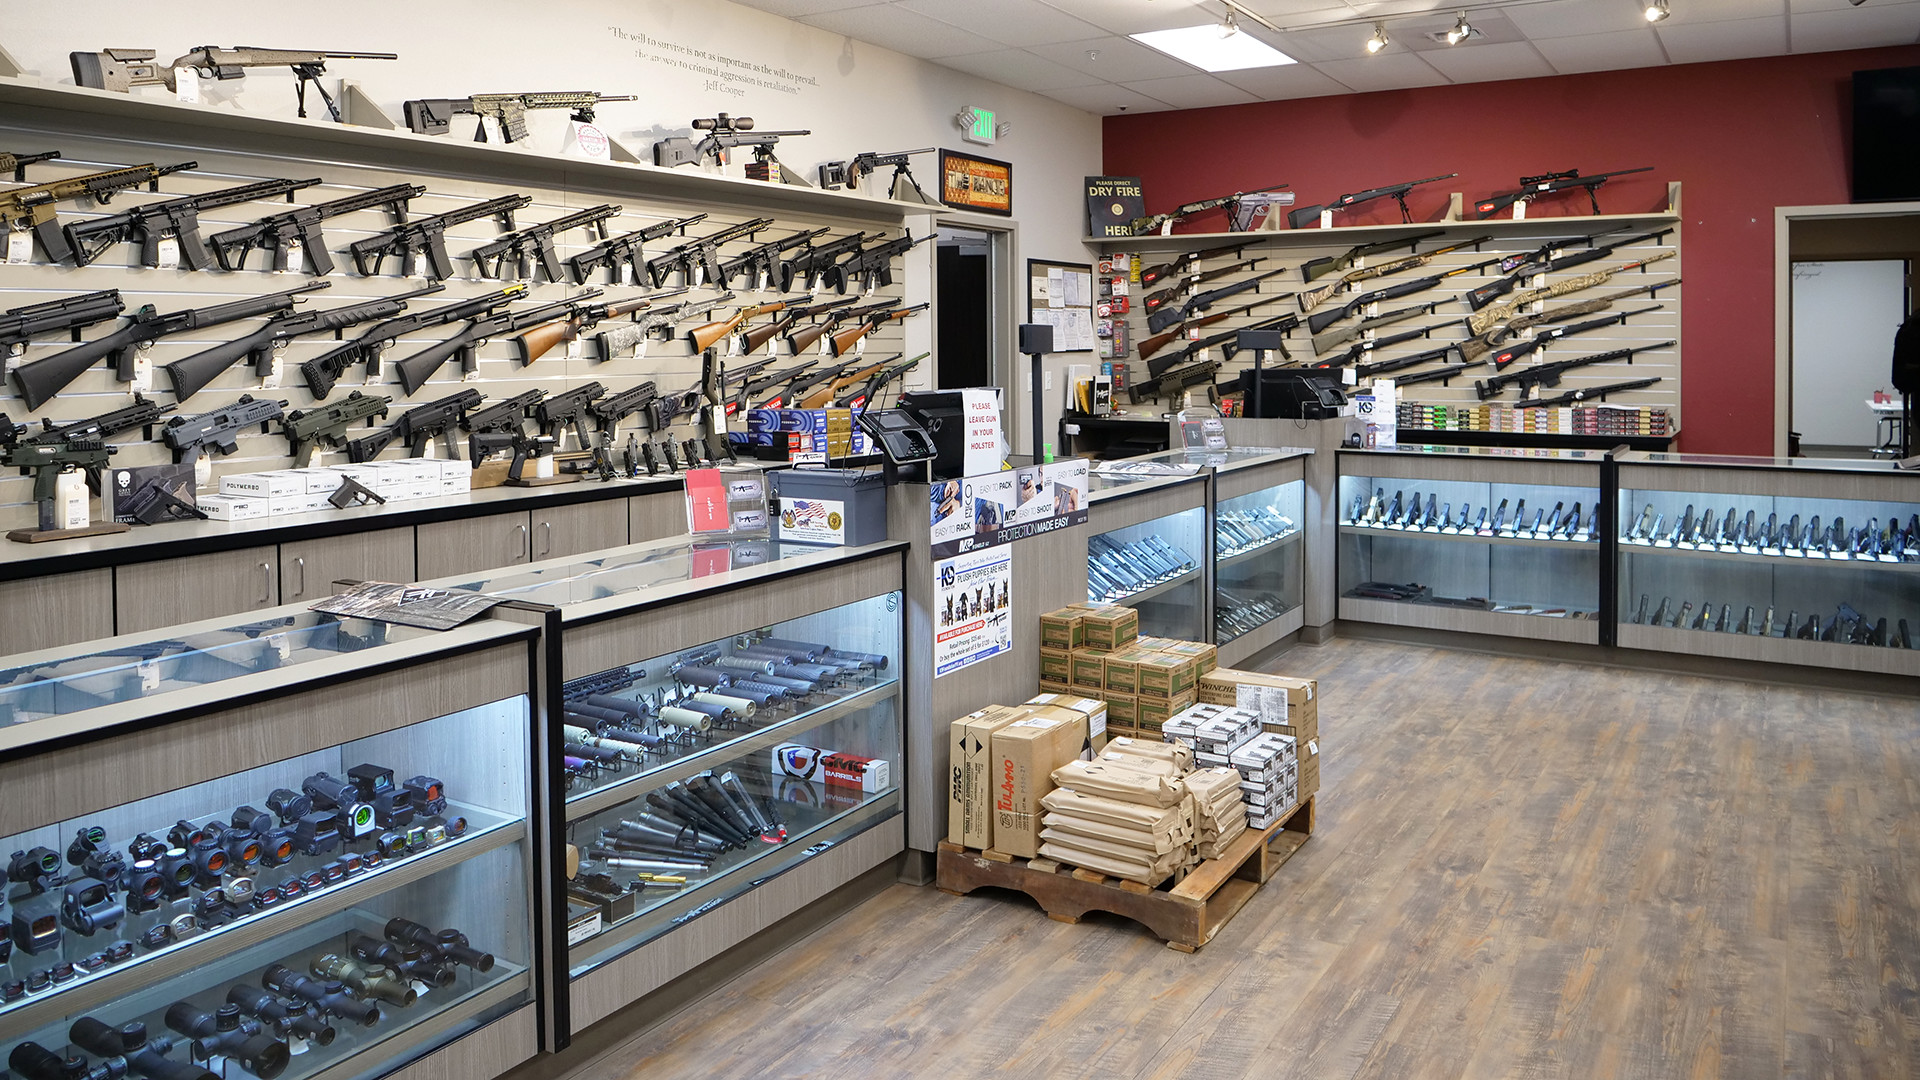 Central Washington's Premier Firearms Retail, Indoor Shooting and Training Facility